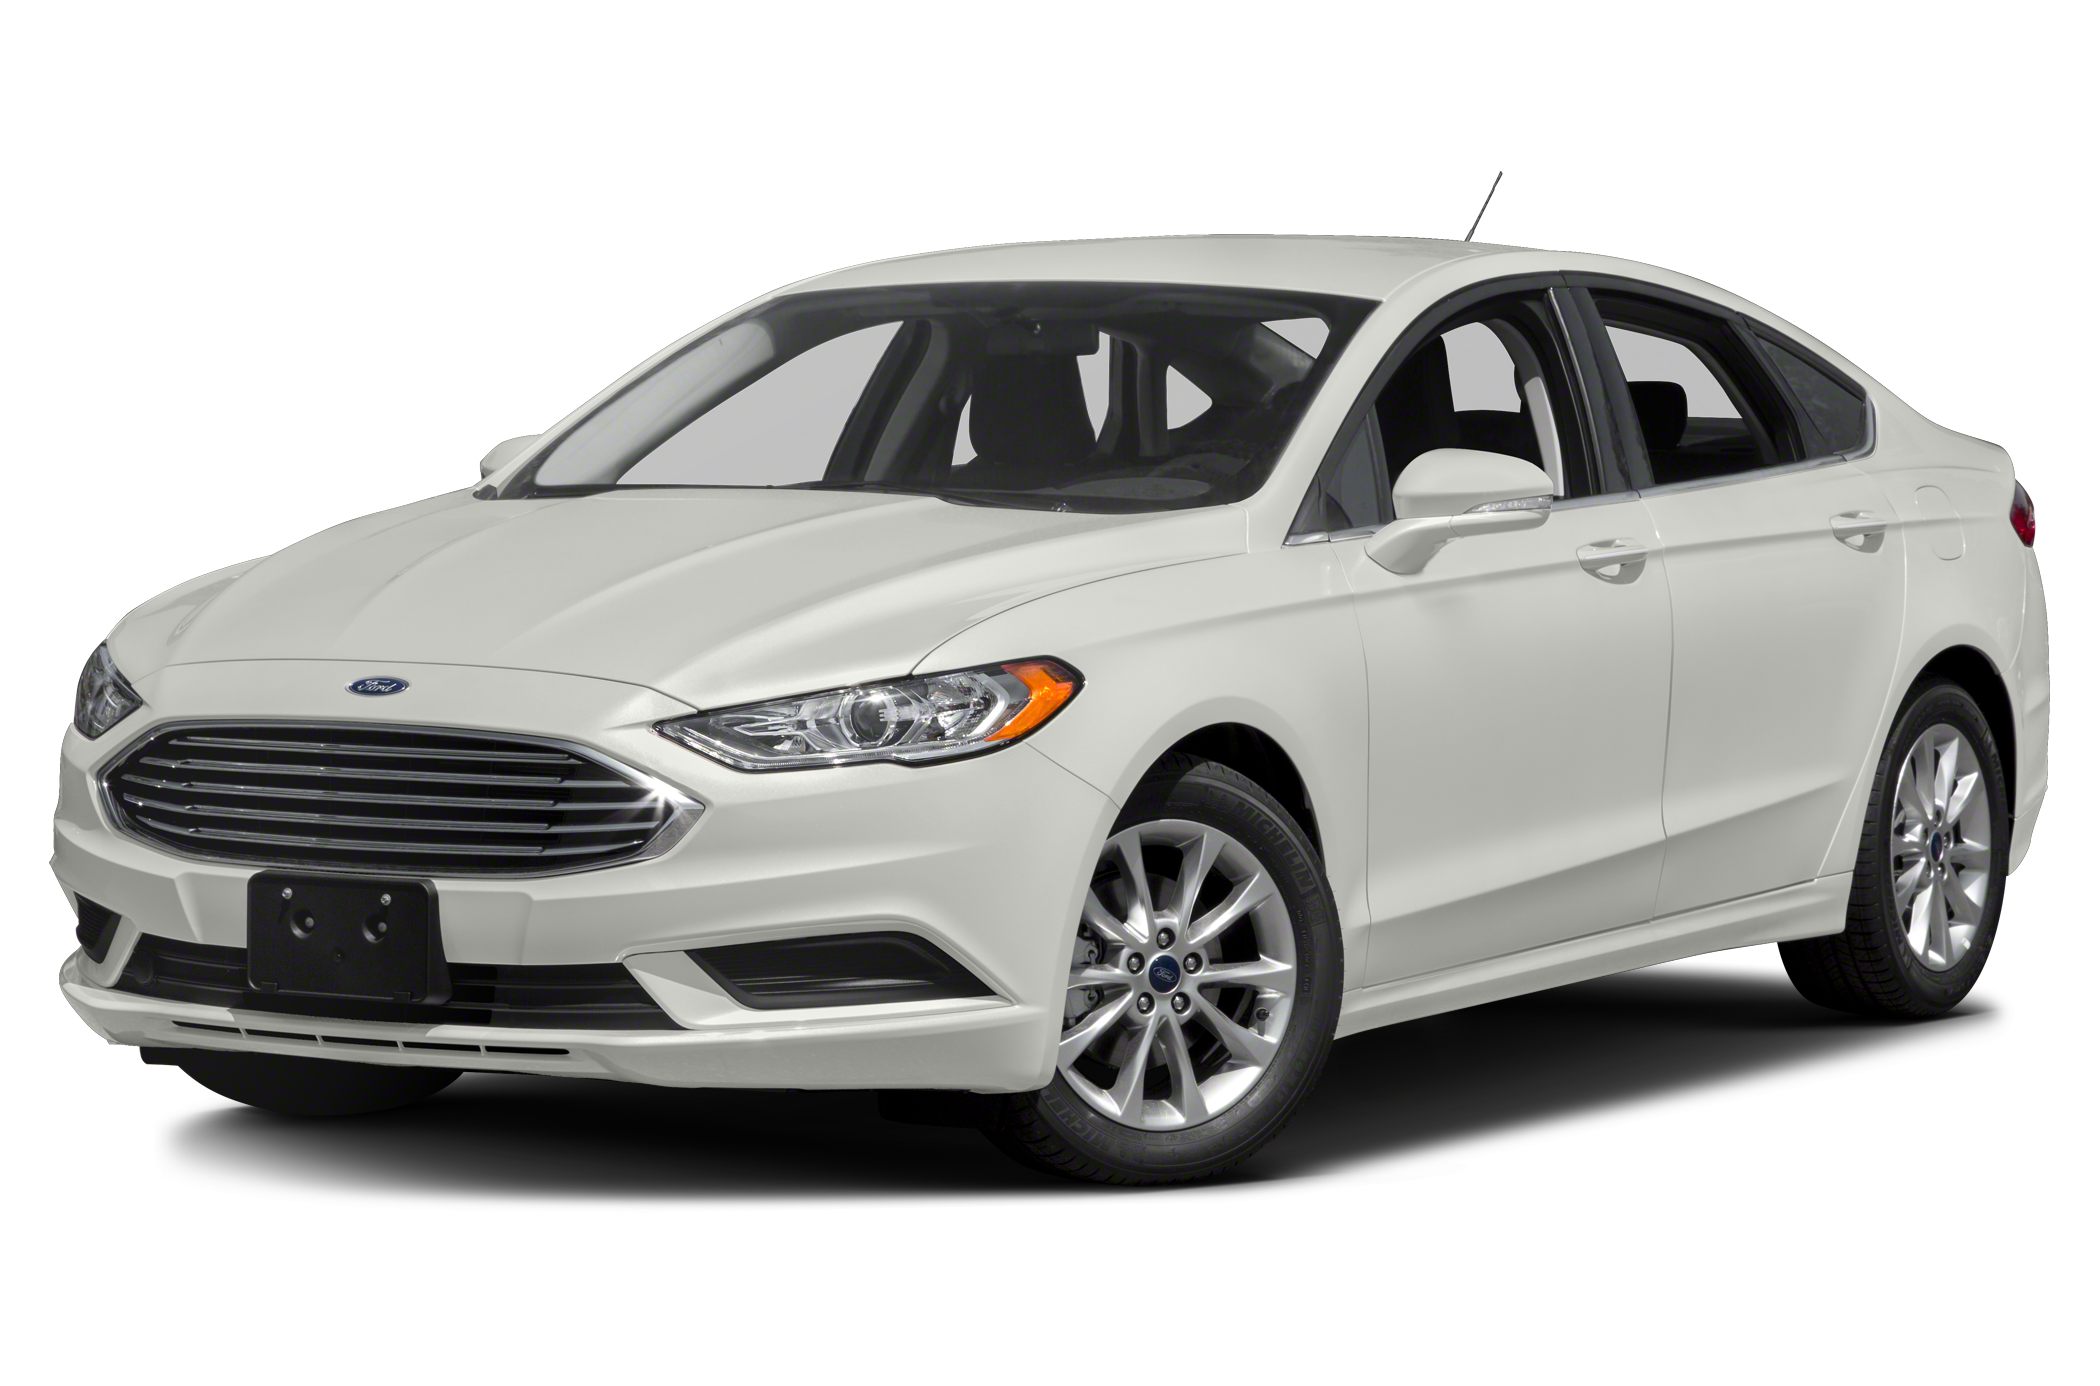 Which cars have appeared on the Ford's recall list?